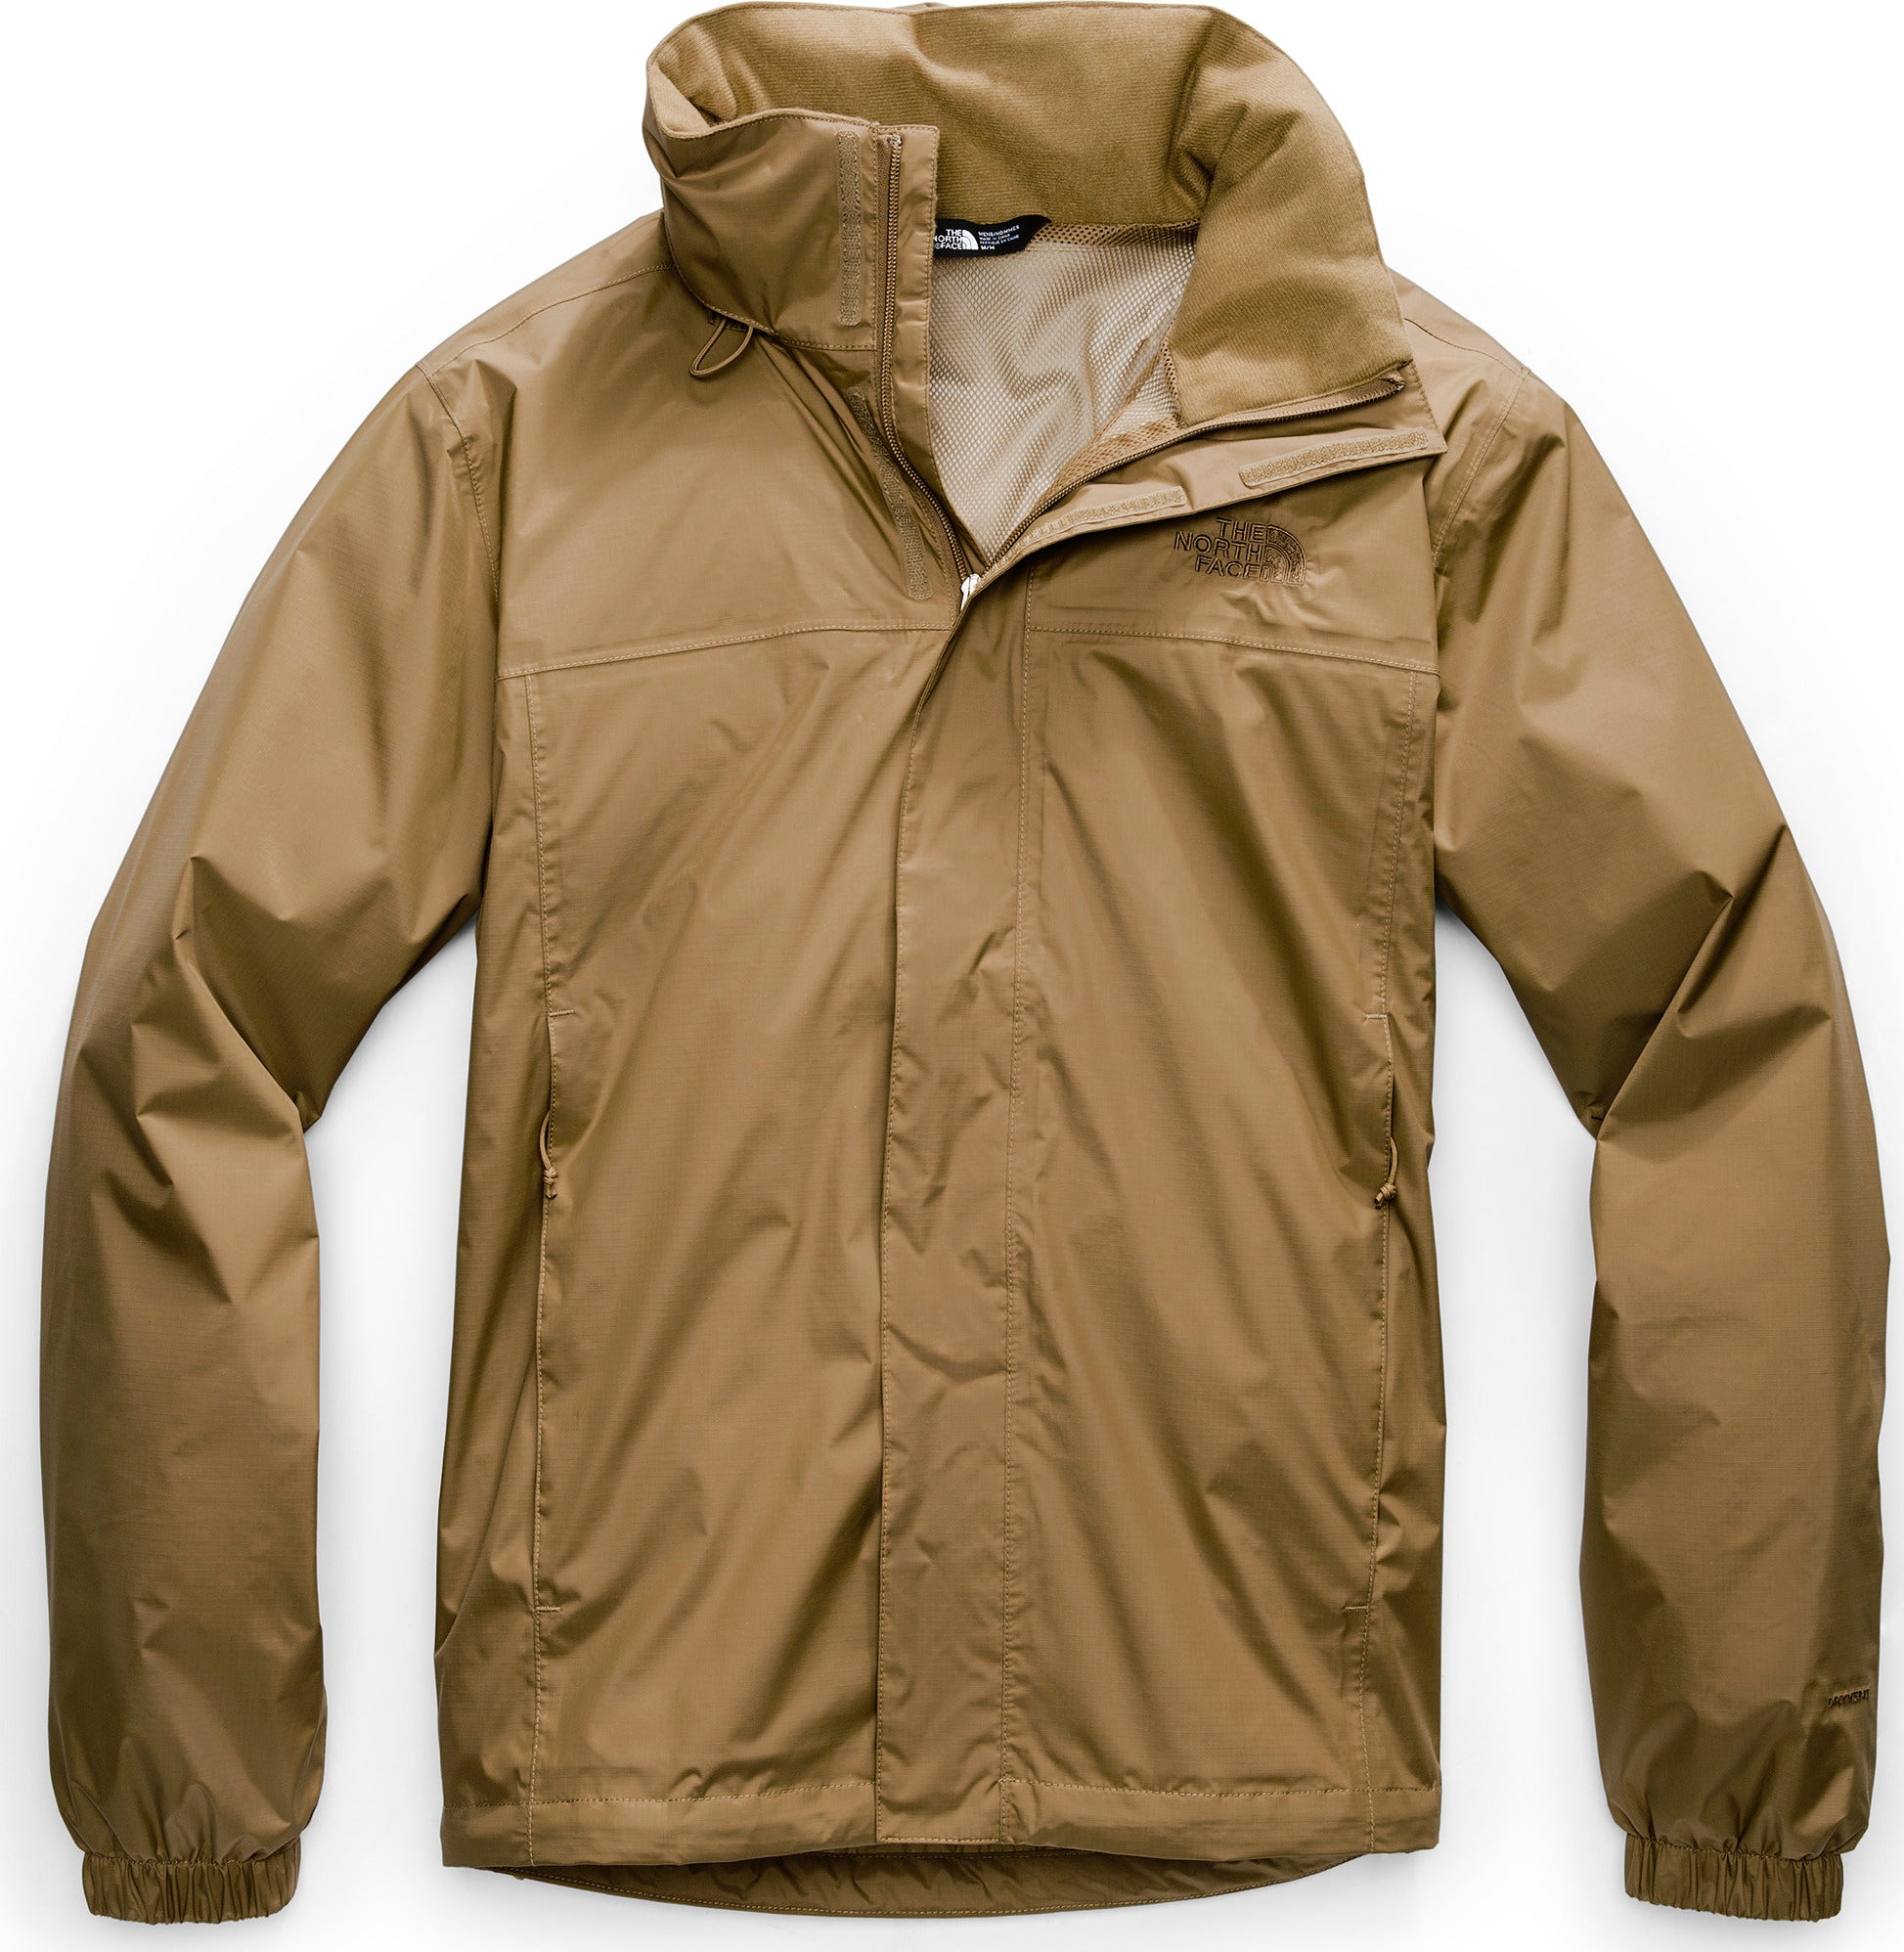 The North Face Resolve 2 Jacket - Men's | Altitude Sports